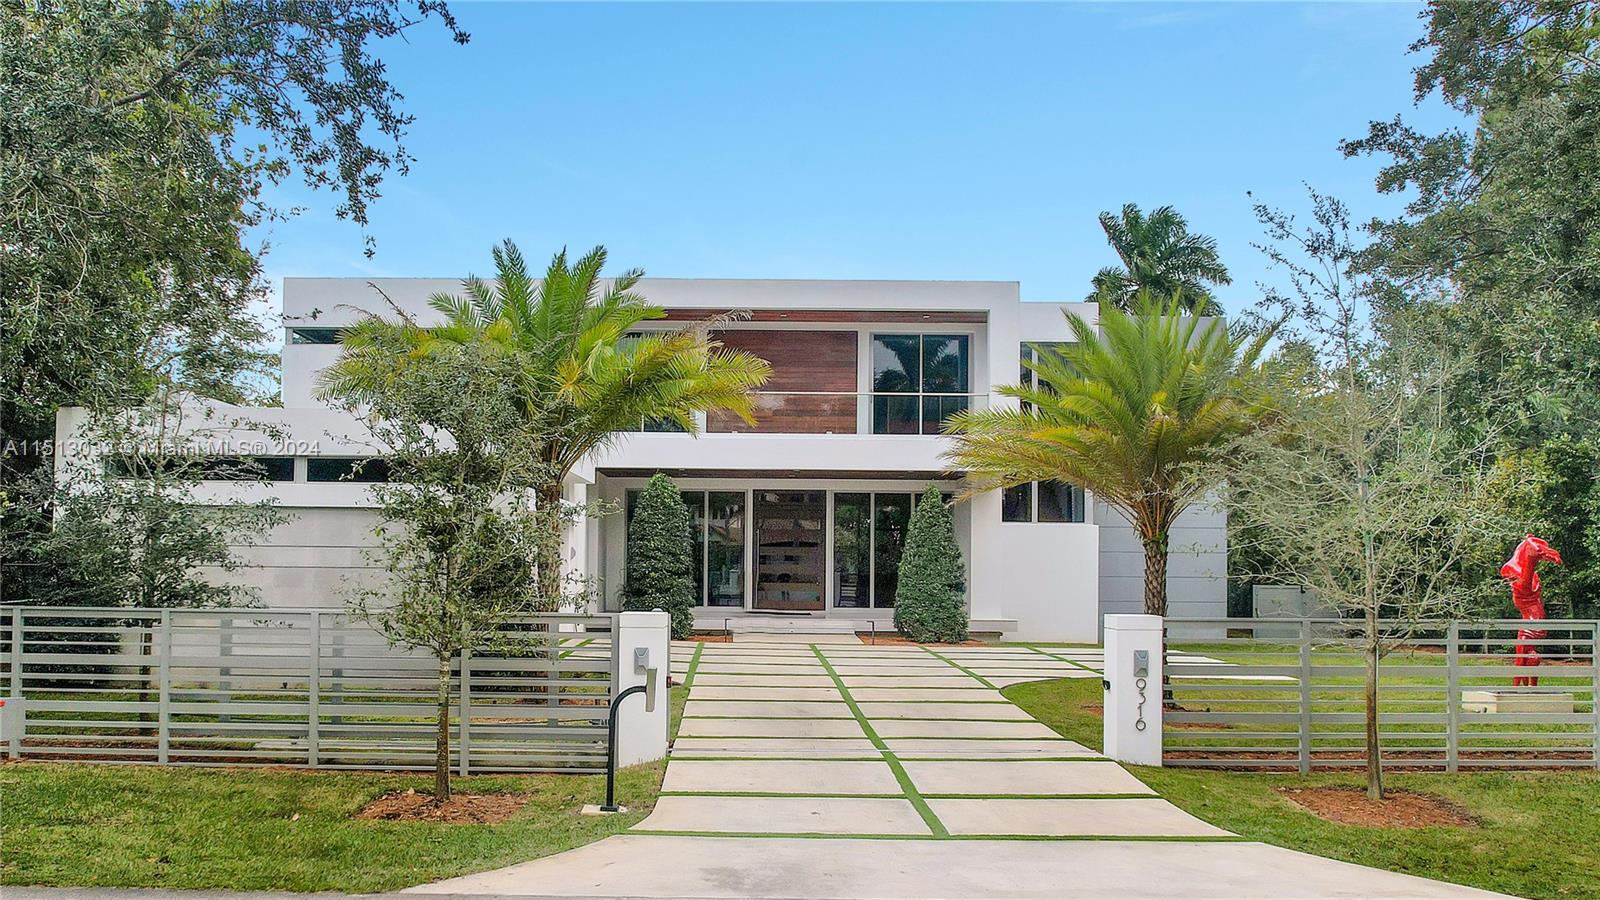 Prime North Pinecrest location on a 16,003 sq ft lot! This exquisite high-end property, aprox 6,228 Sq.Ft (adjusted) is the epitome of luxury living in SoFlo. Constructed in 2022, this modern home features top-of-the-line finishes that radiate sophistication. Includes a state-of-the-art swimming pool, equipped with a powerful turbine for counter-current swimming, perfect for fitness enthusiasts or those seeking relaxation! Additionally, the residence includes a dual electric vehicle charging setup, marble floors, sub-zero/wolf appliances, RH chandeliers, advanced high-definition Lutron sound system provides an unparalleled auditory experience, projector with retractable cinema screen, custom cabinets and closets and much more. Near shopping and dining. **Red sculpture is not included.